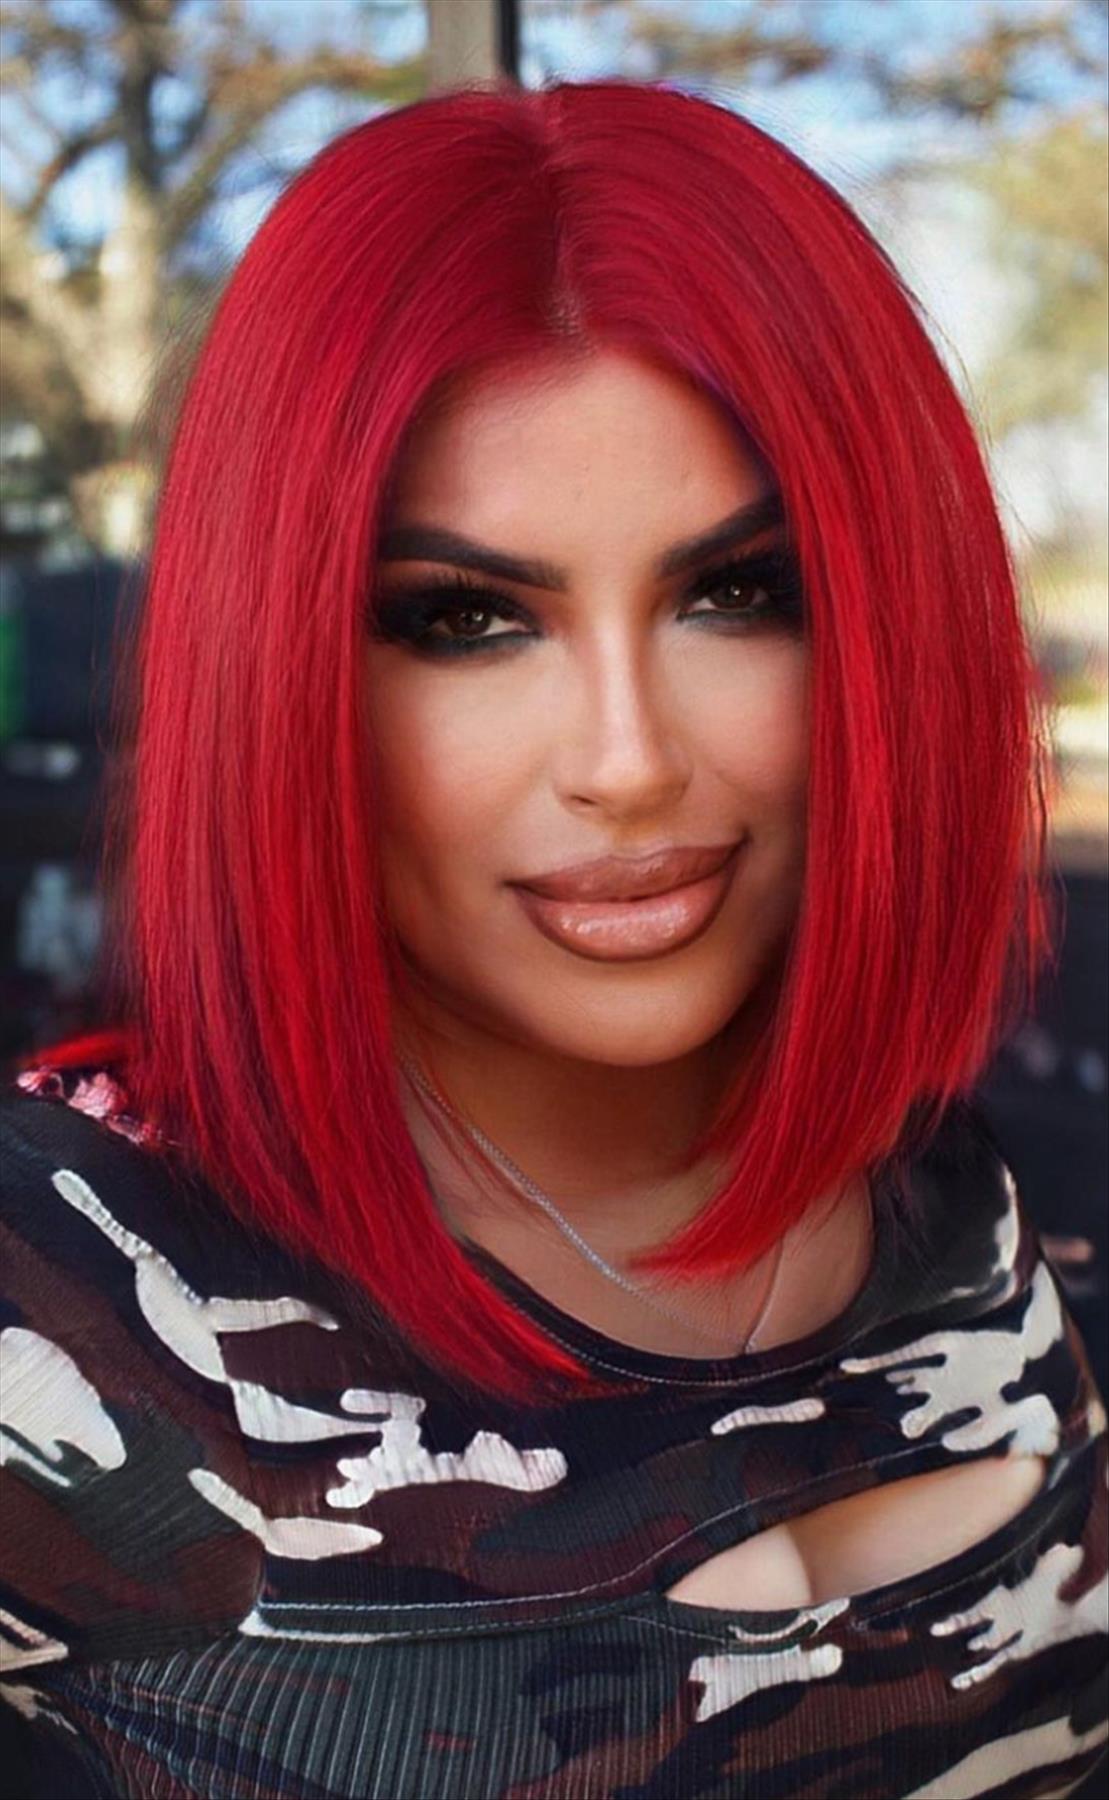 Fabulous red hair color for Fall hair color inspiration